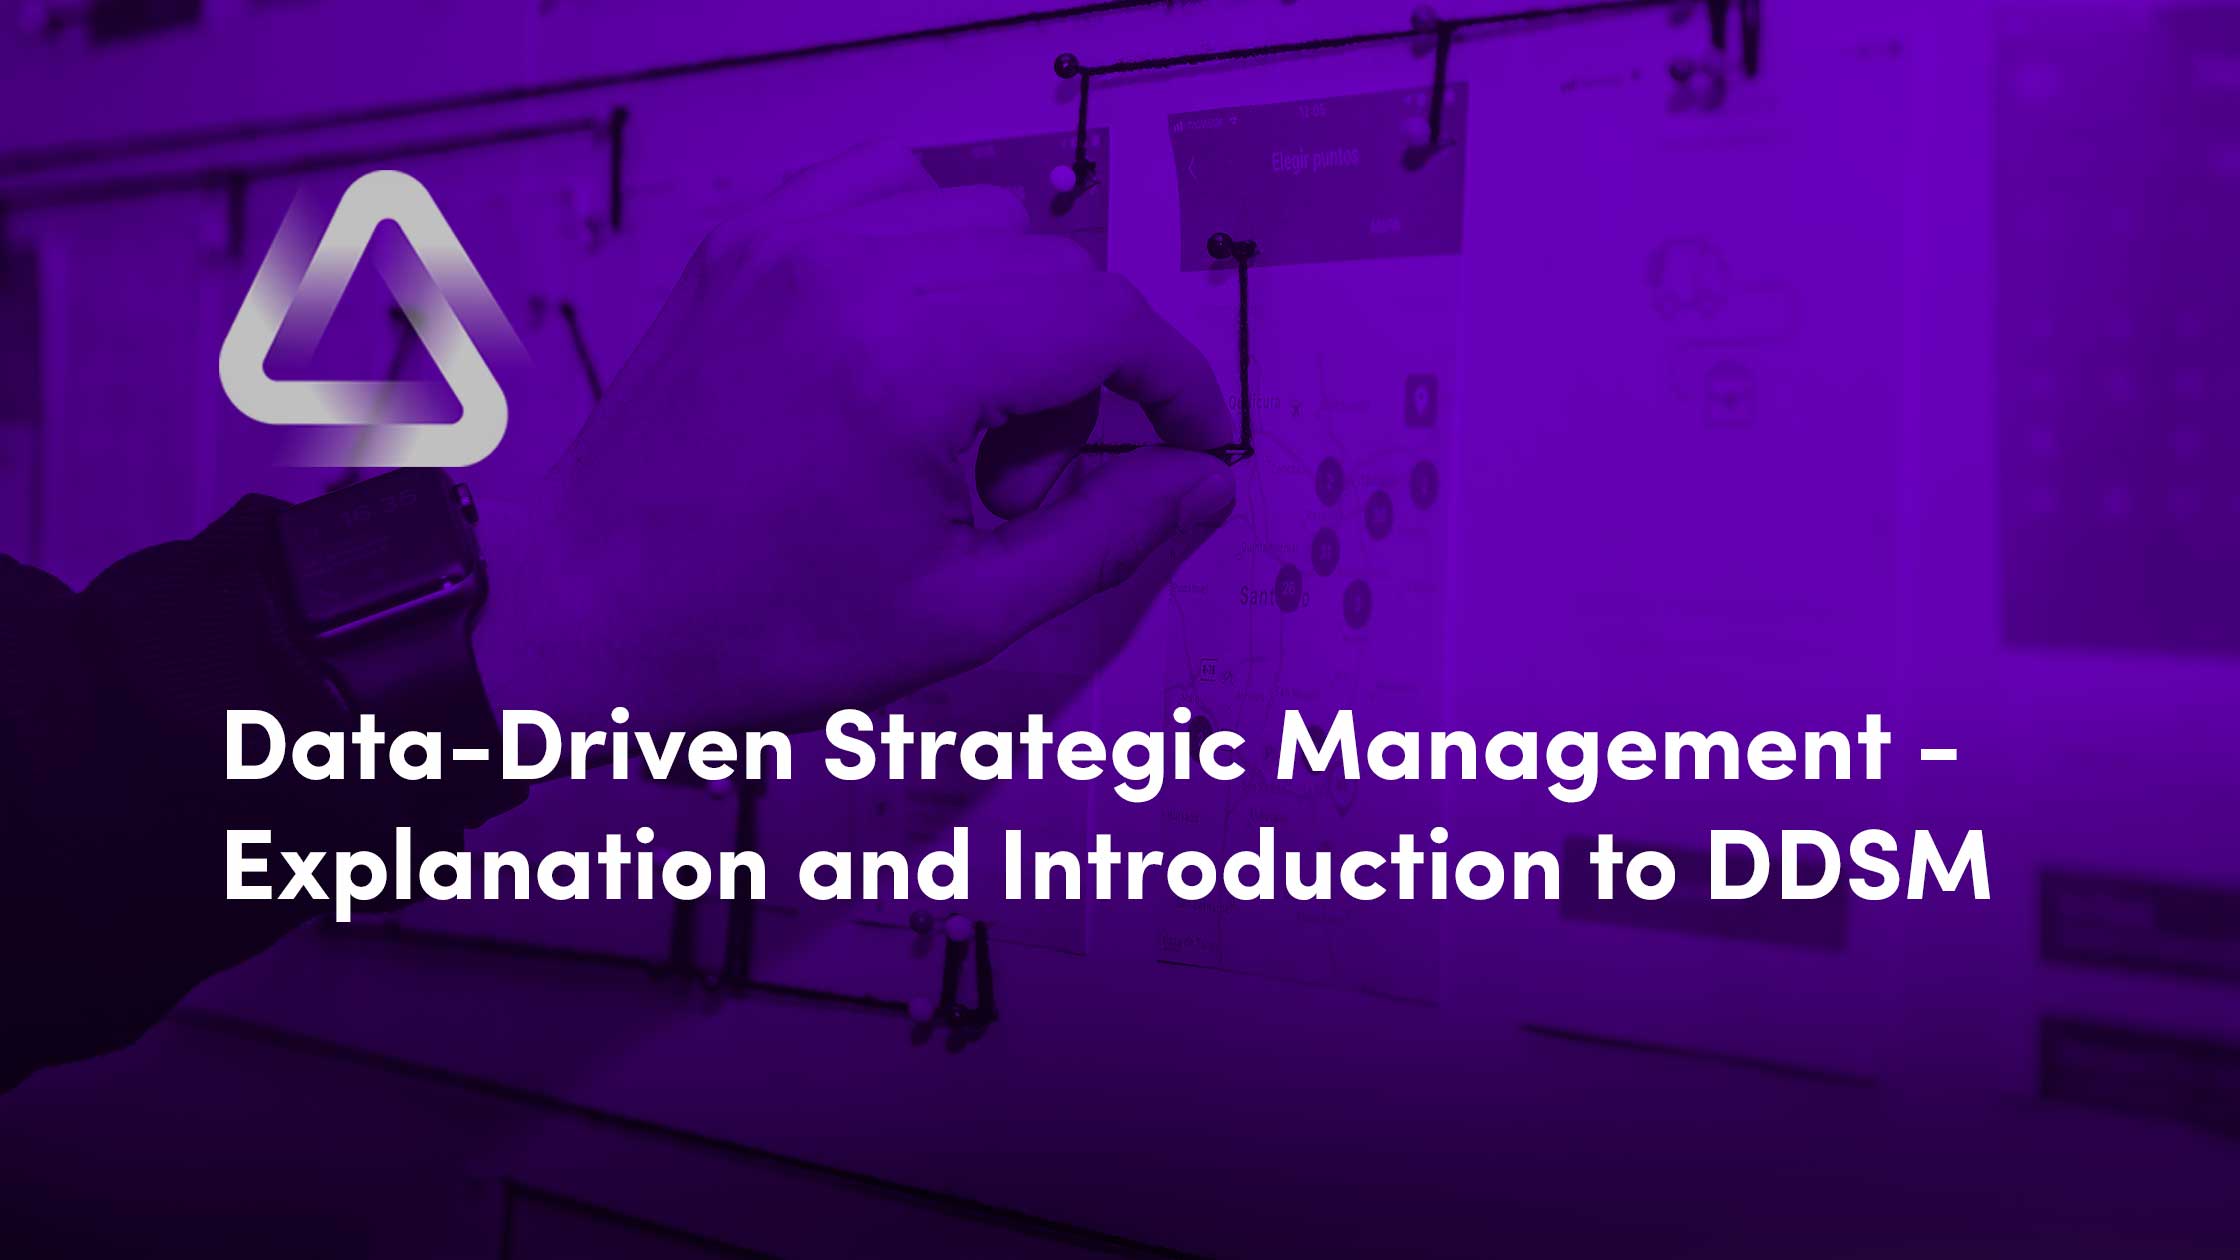 What is Data-Driven Strategic Management (DDSM) - Explanation and Introduction